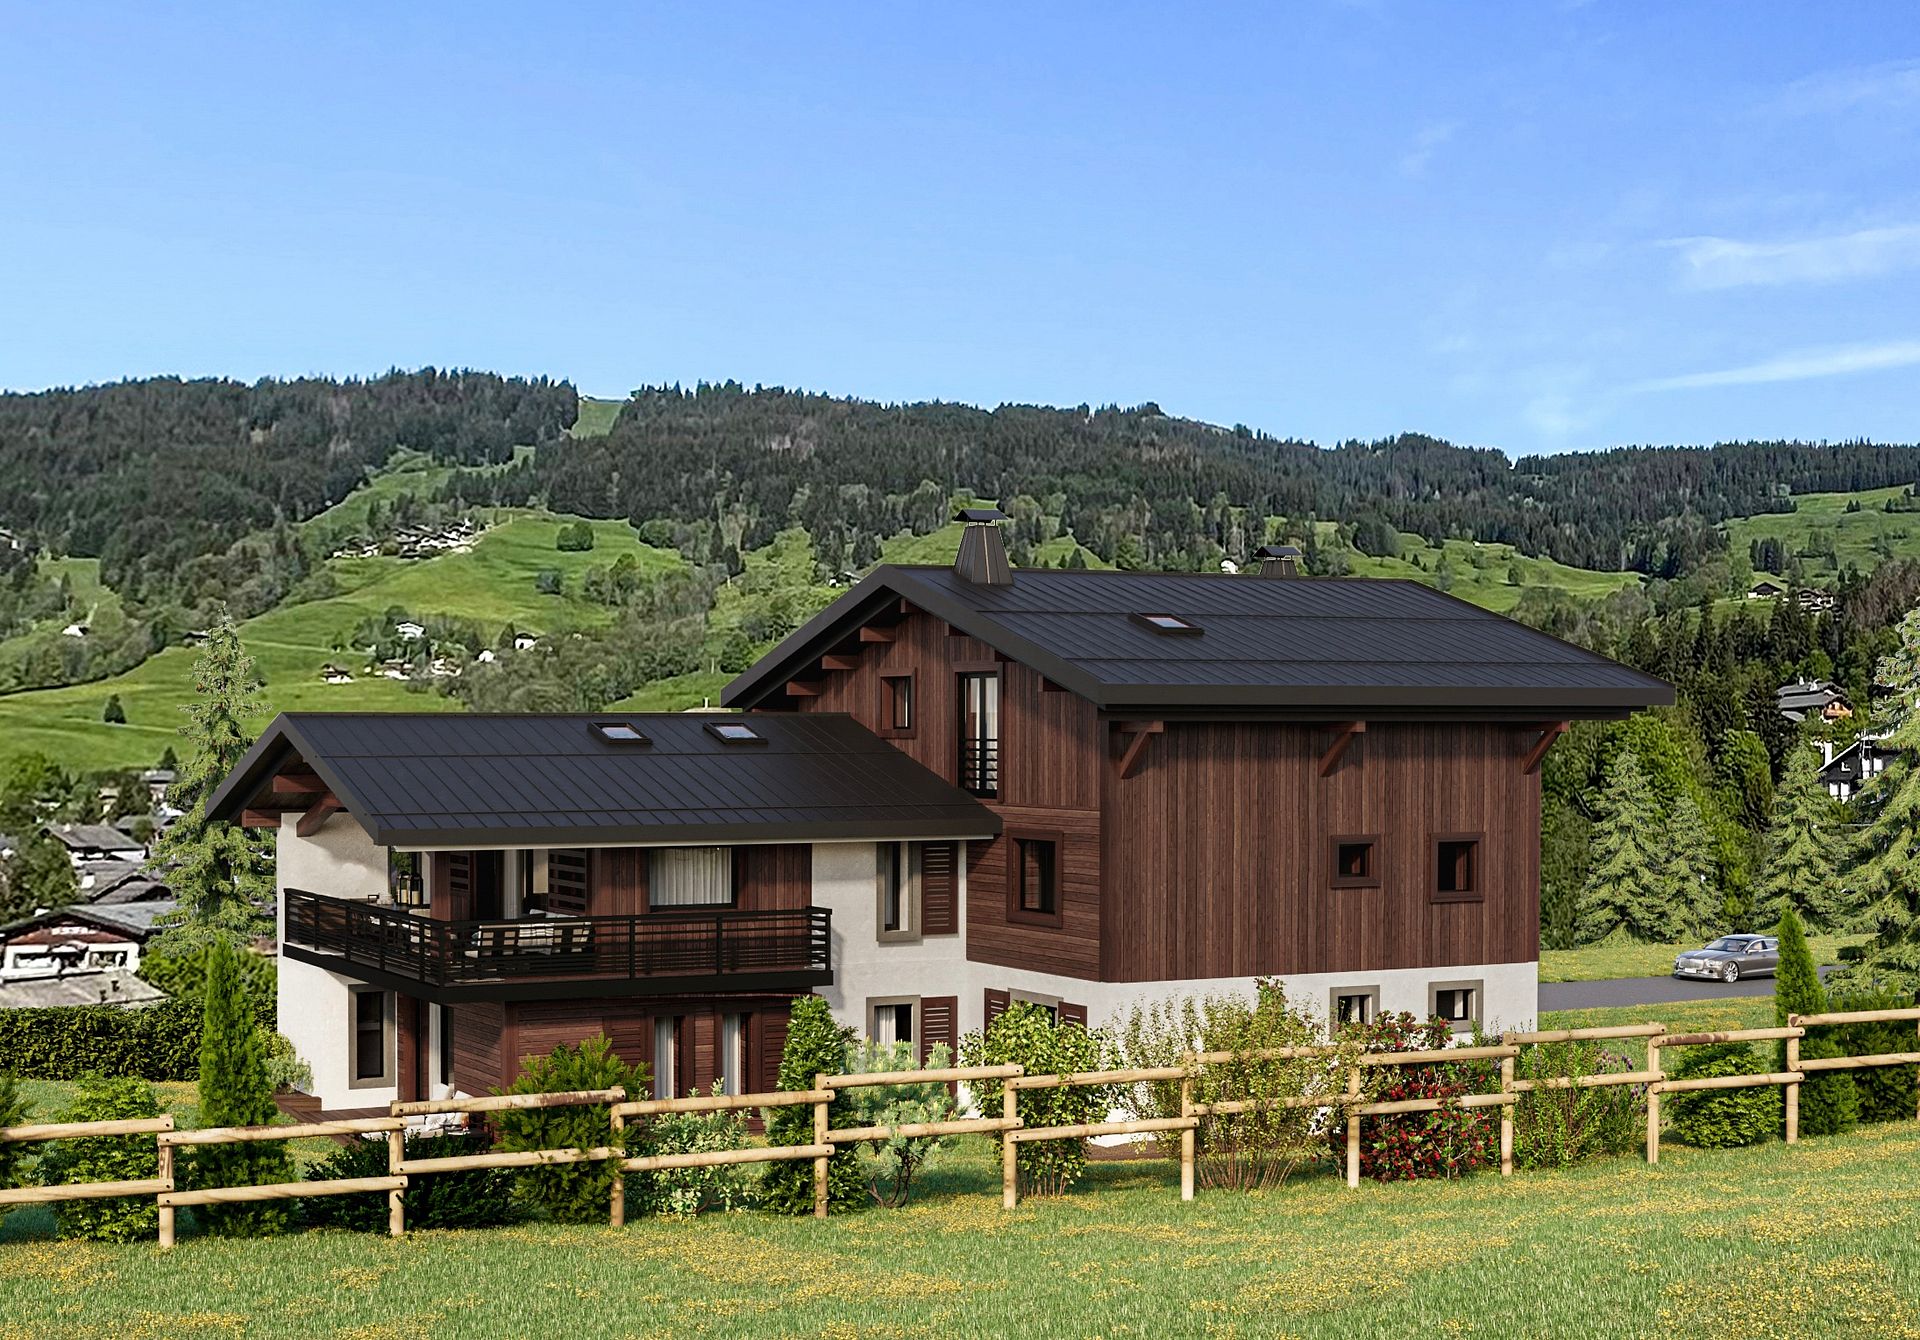 5 bed Chalet For Sale in Evasion Mont-Blanc, French Alps